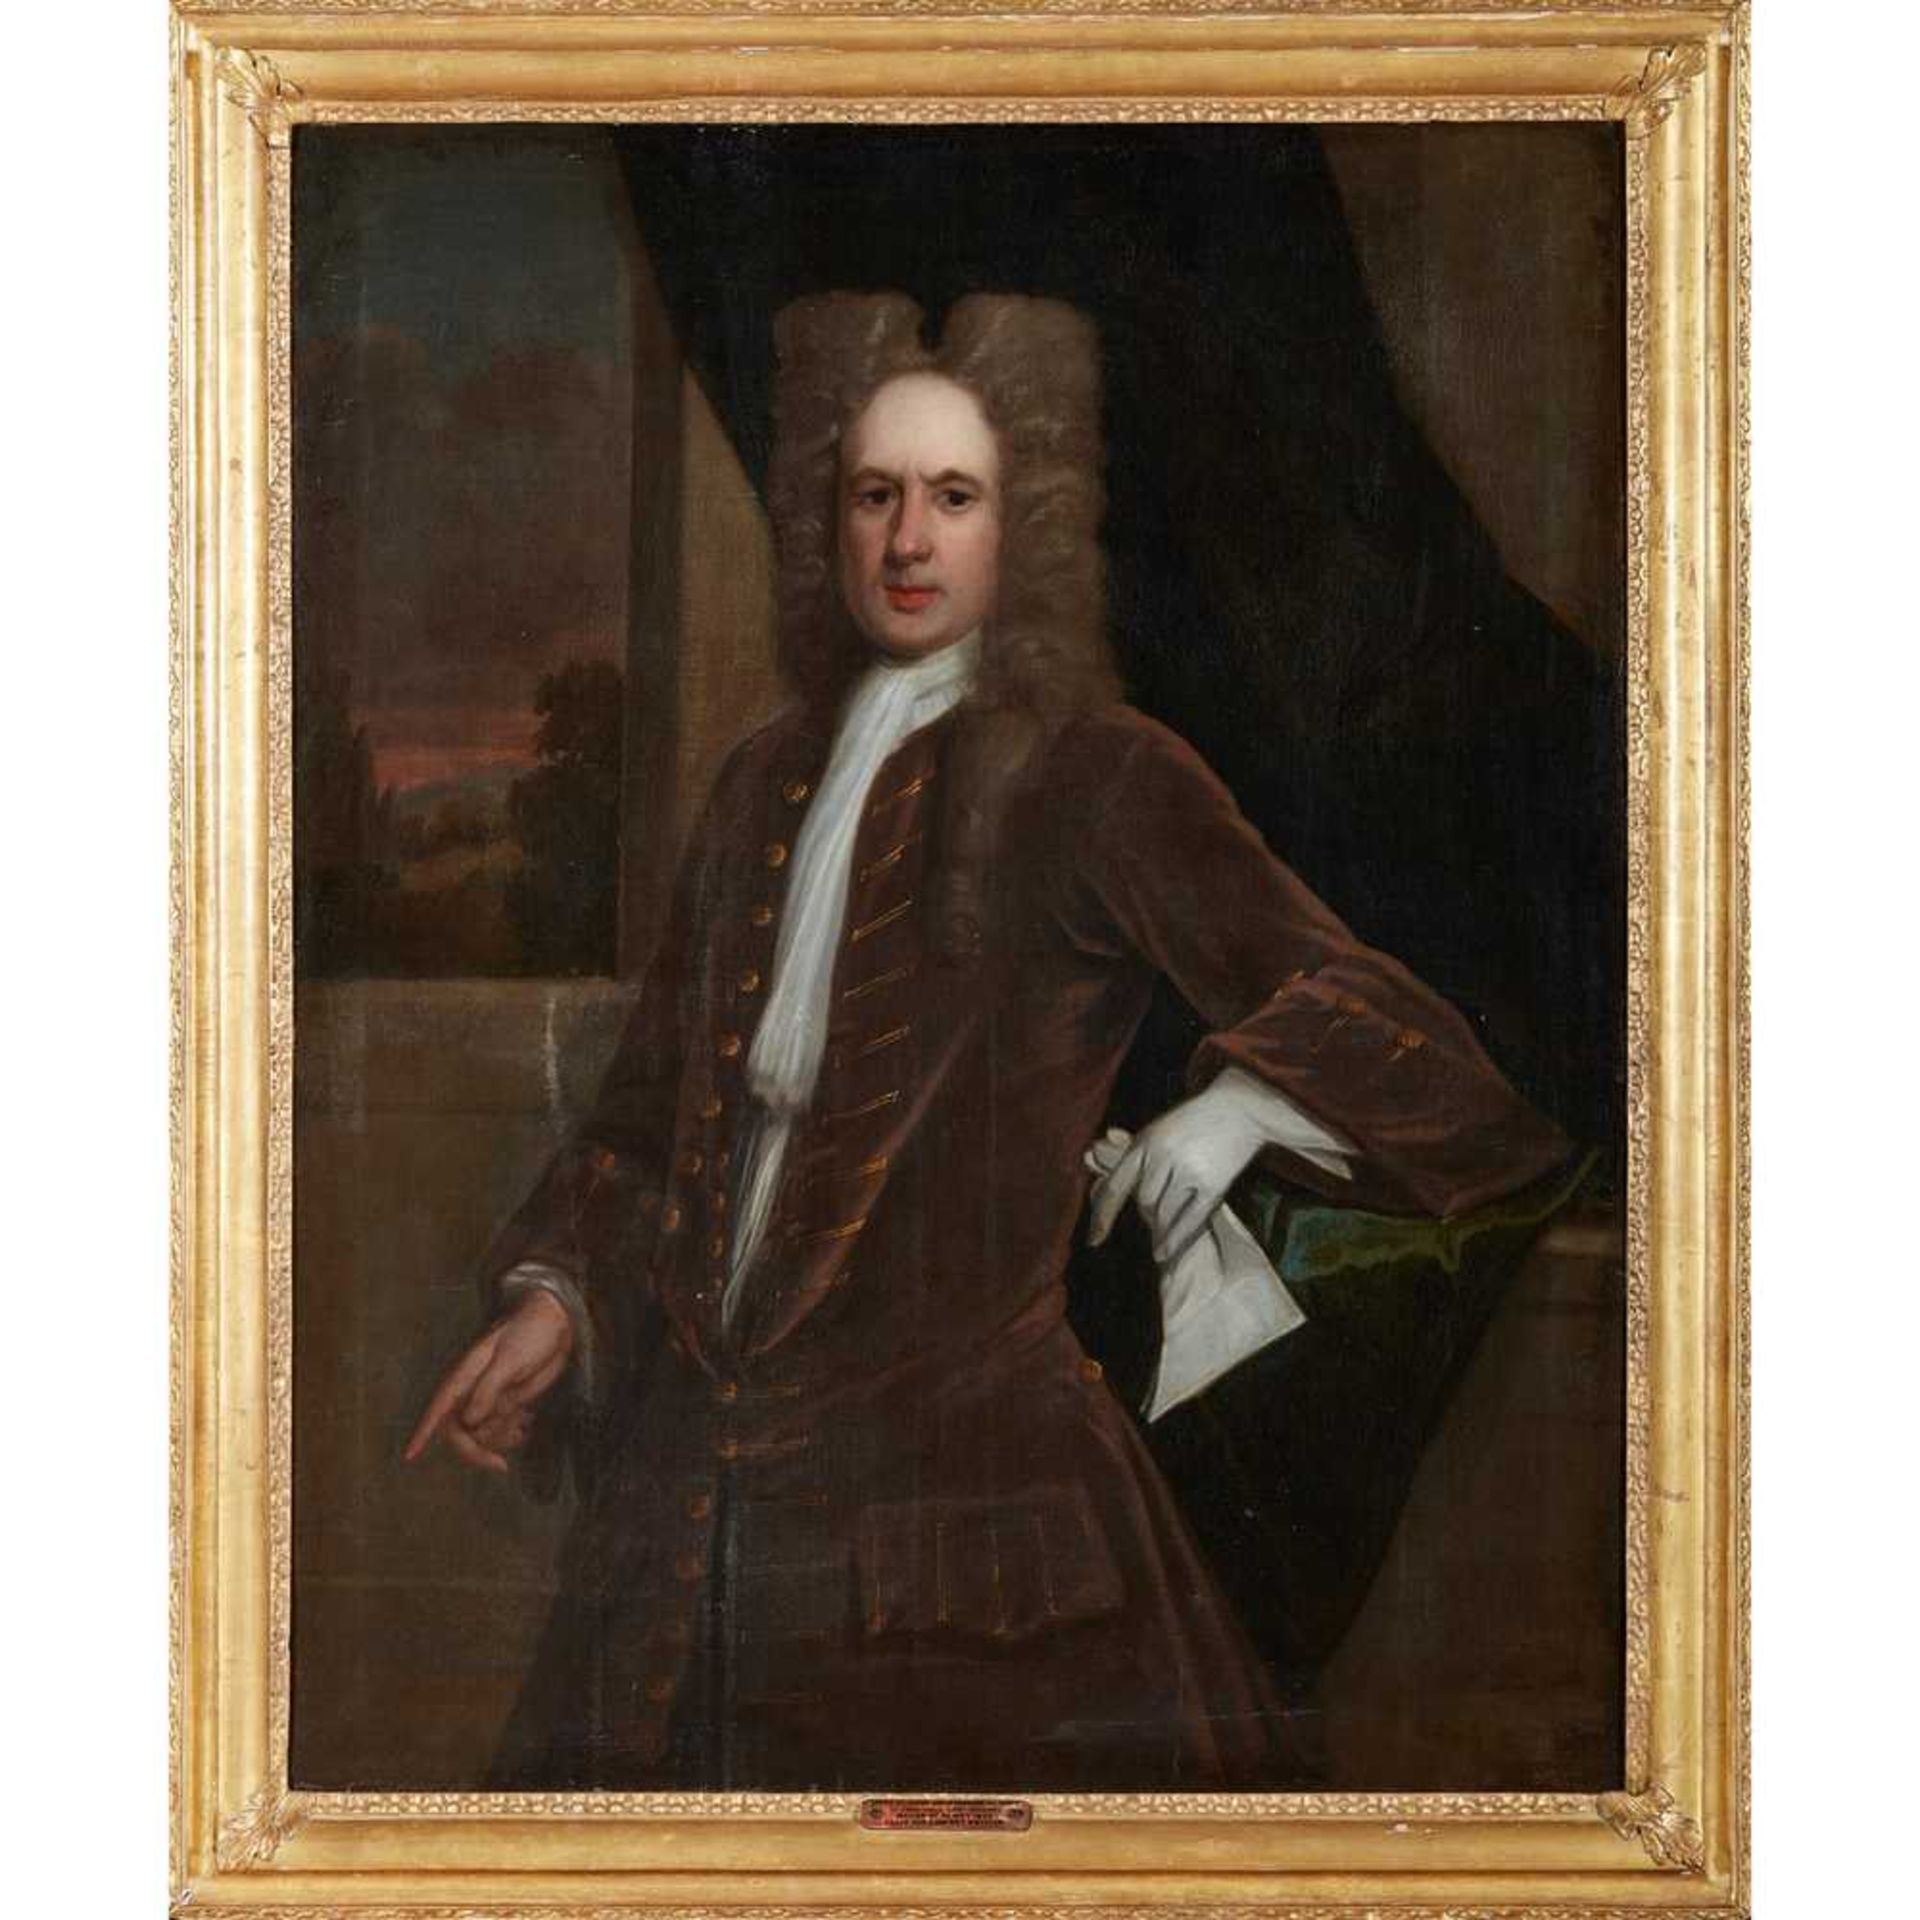 ATTRIBUTED TO SIR GODFREY KNELLER THREE QUARTER LENGTH PORTRAIT OF JAMES HILHOUSE OF FREEHALL LONDON - Image 2 of 3